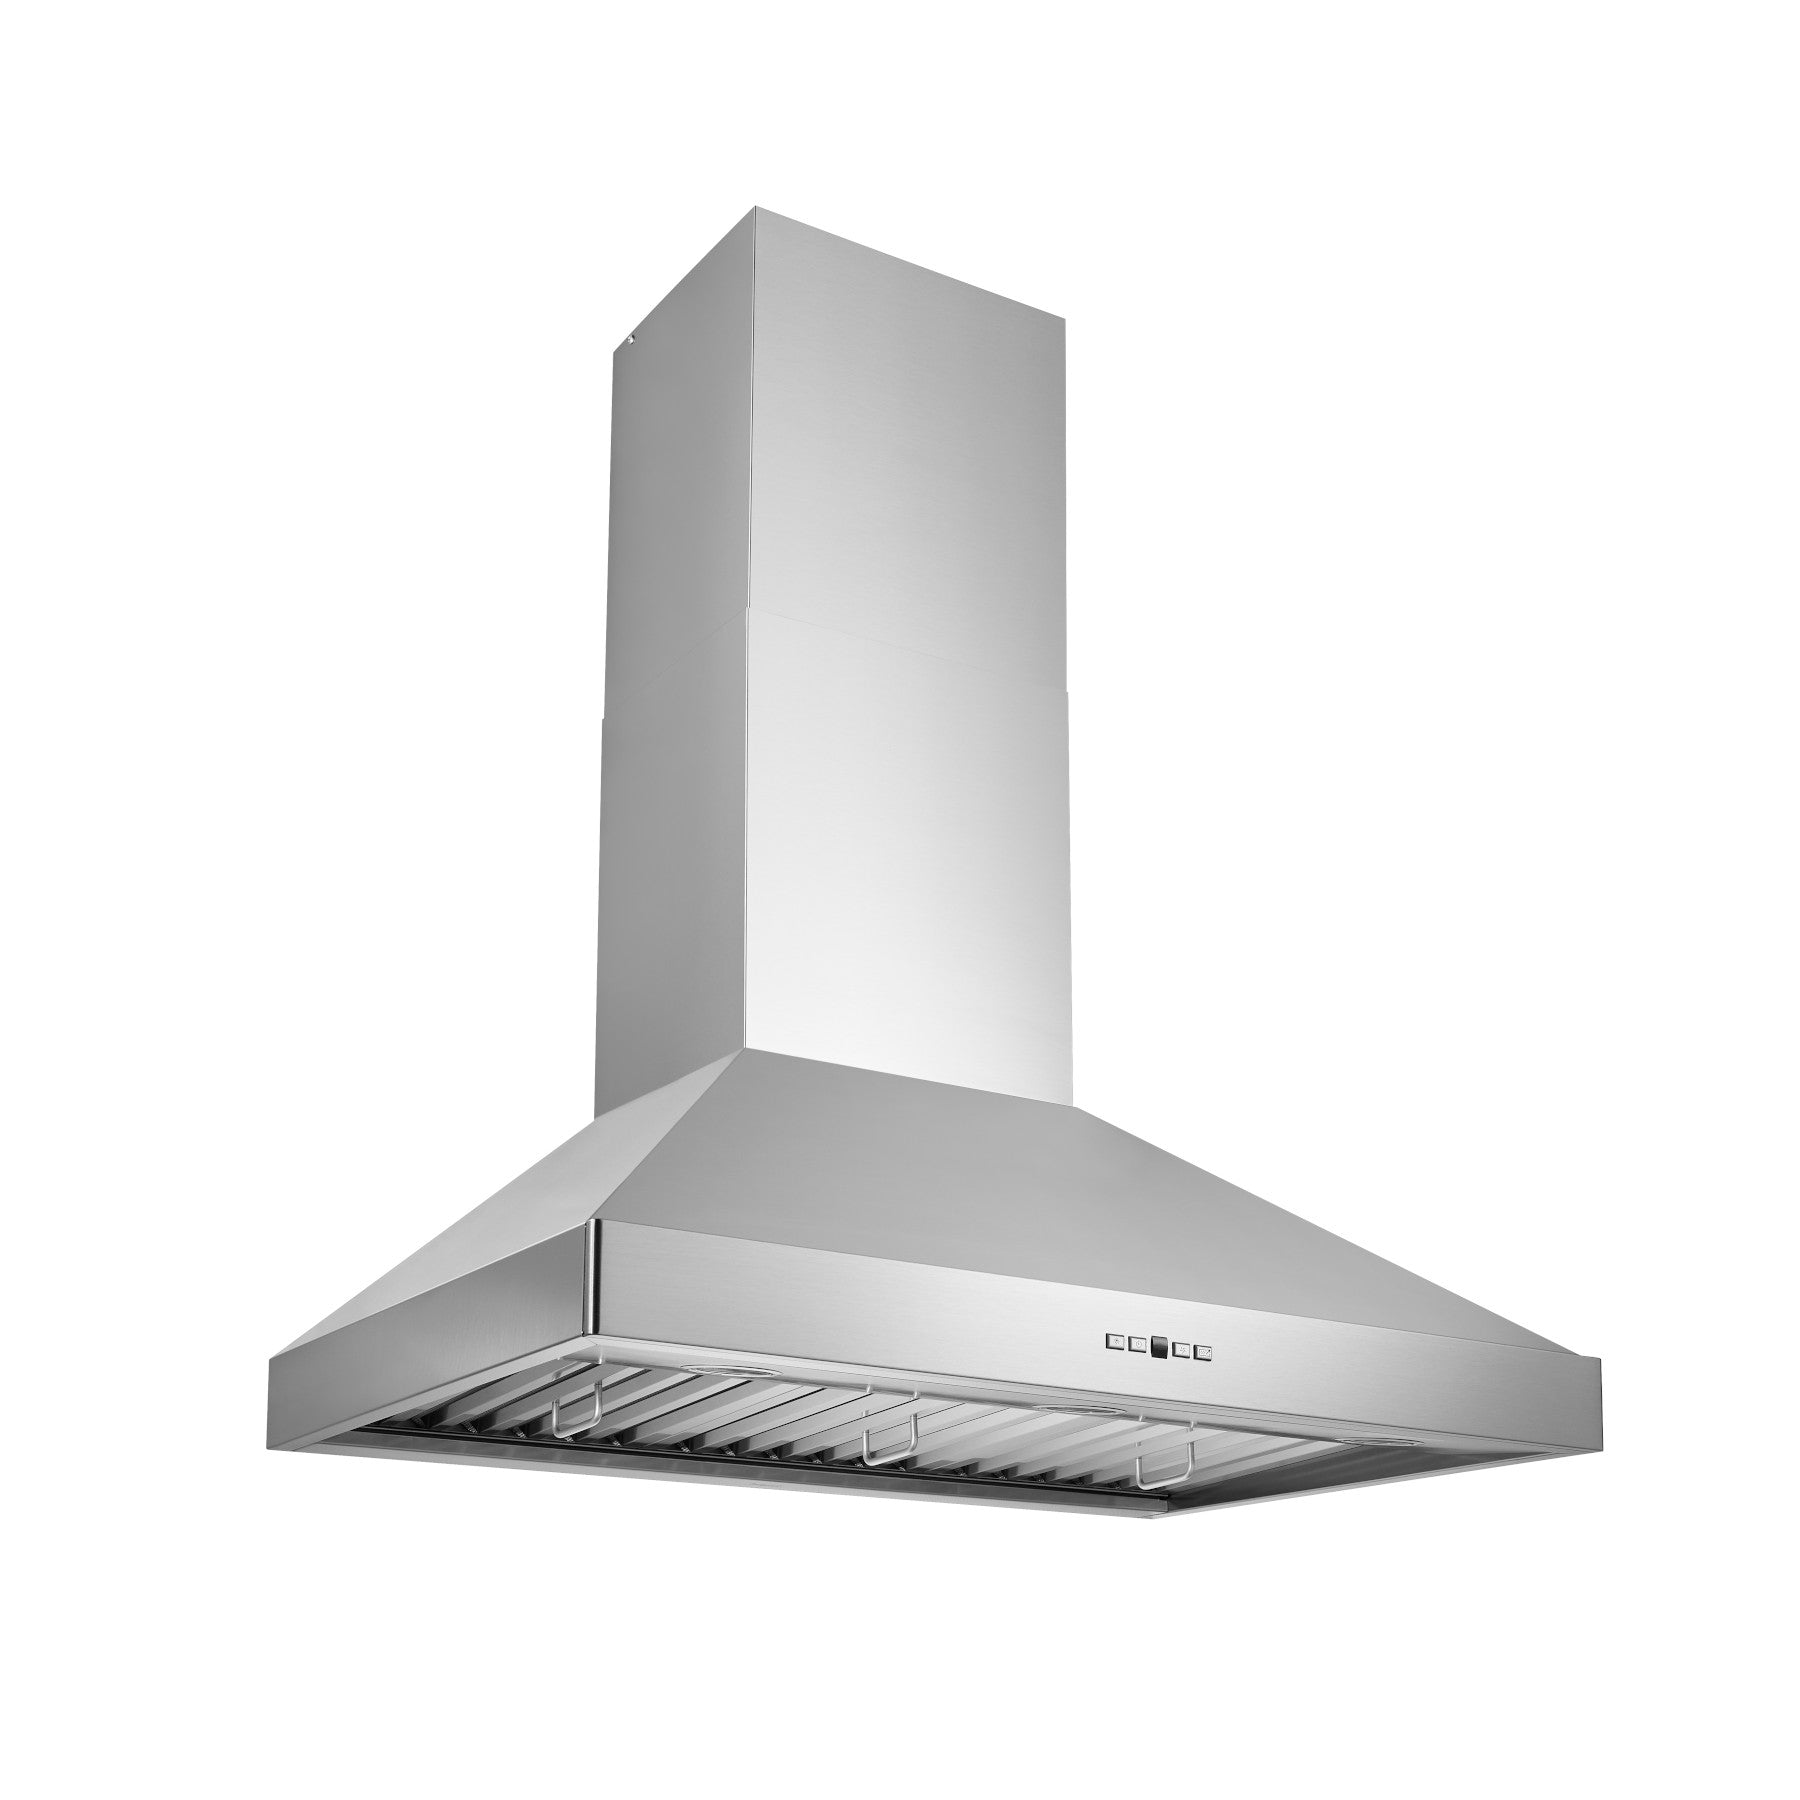 Best - 42 Inch 800 CFM Wall Mount and Chimney Range Vent in Stainless - WPP9IQ42SB